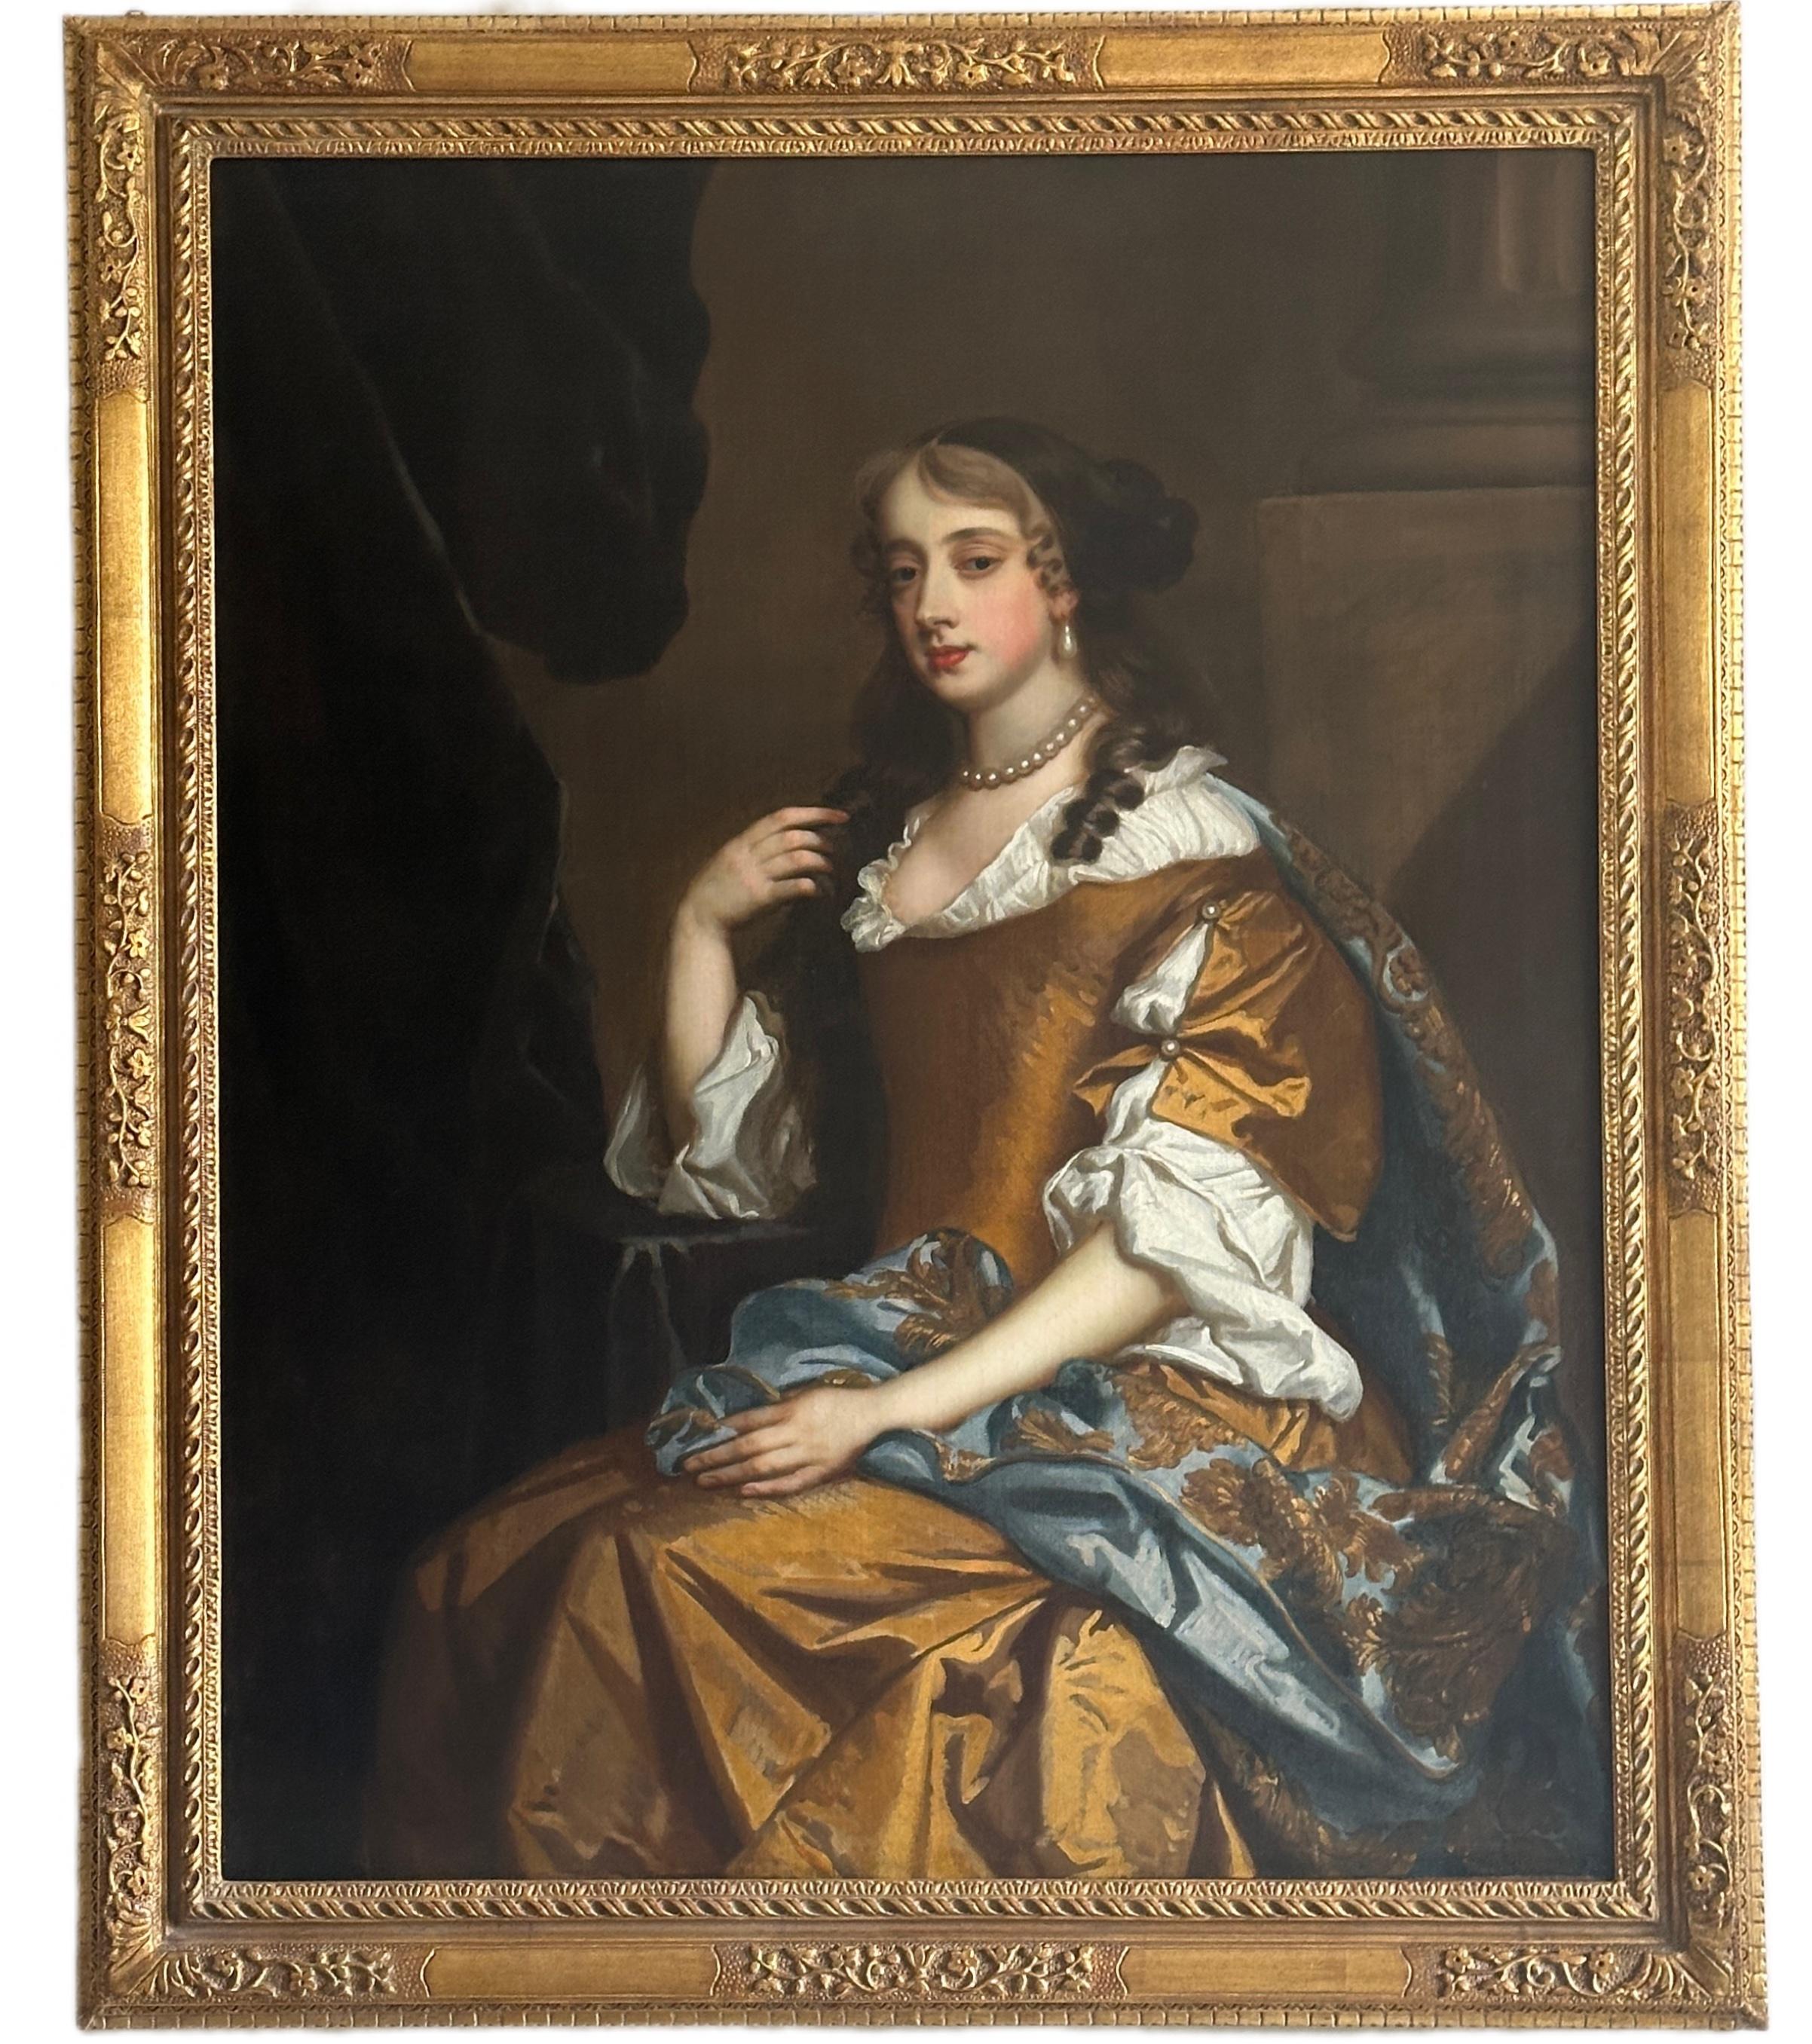 Studio of Peter Lely Portrait Painting - 17th century portrait of a lady seated in an interior